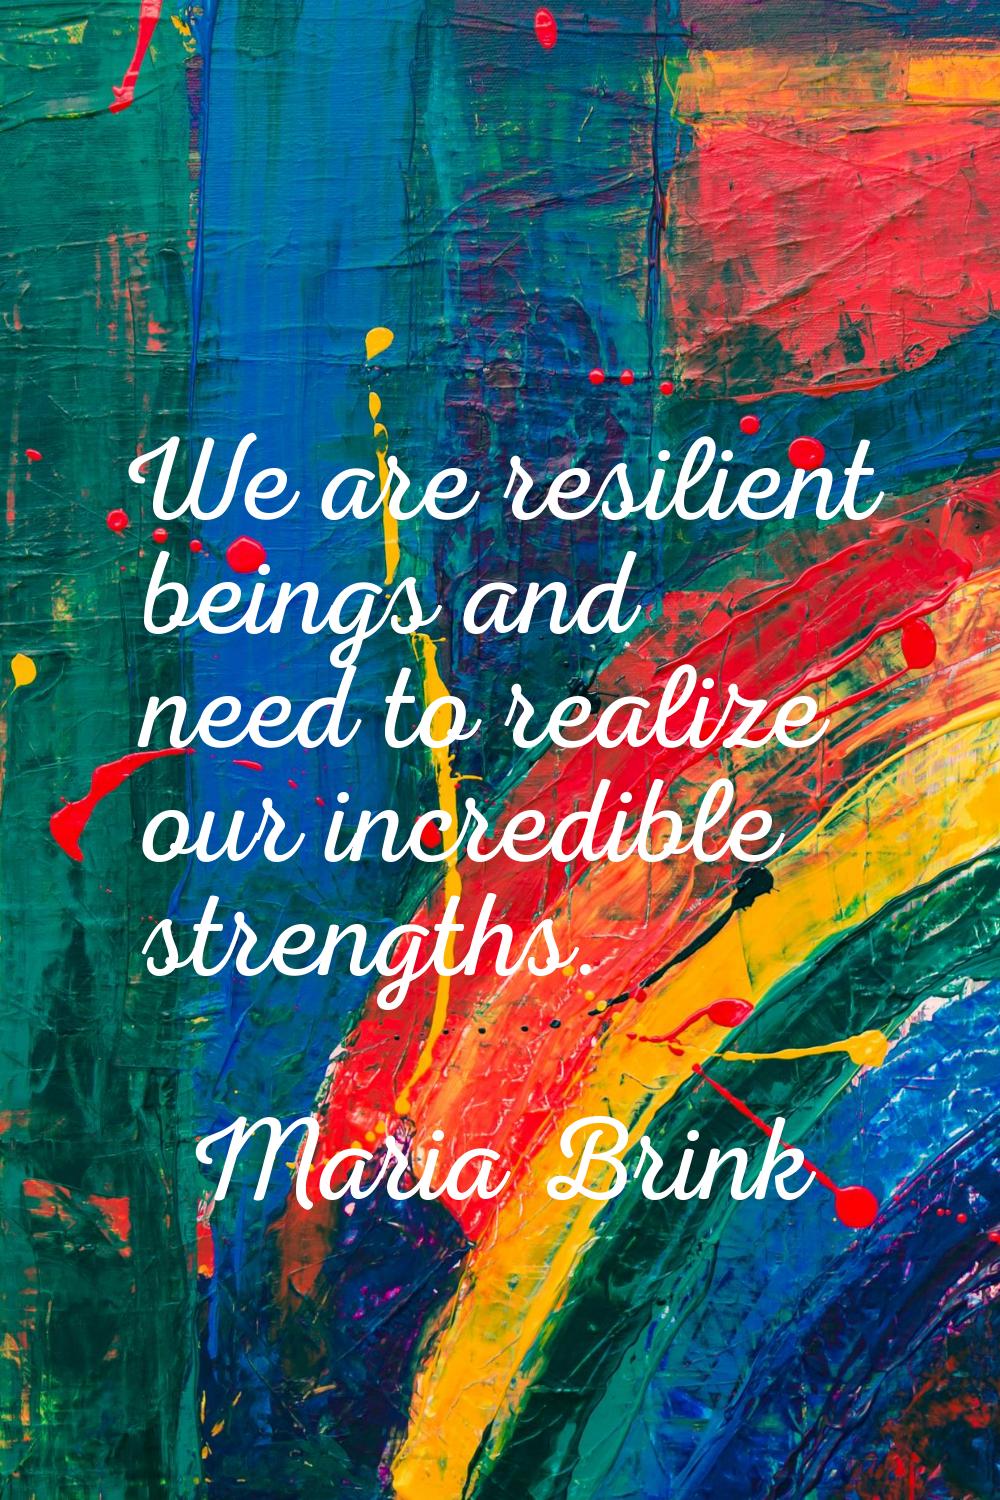 We are resilient beings and need to realize our incredible strengths.